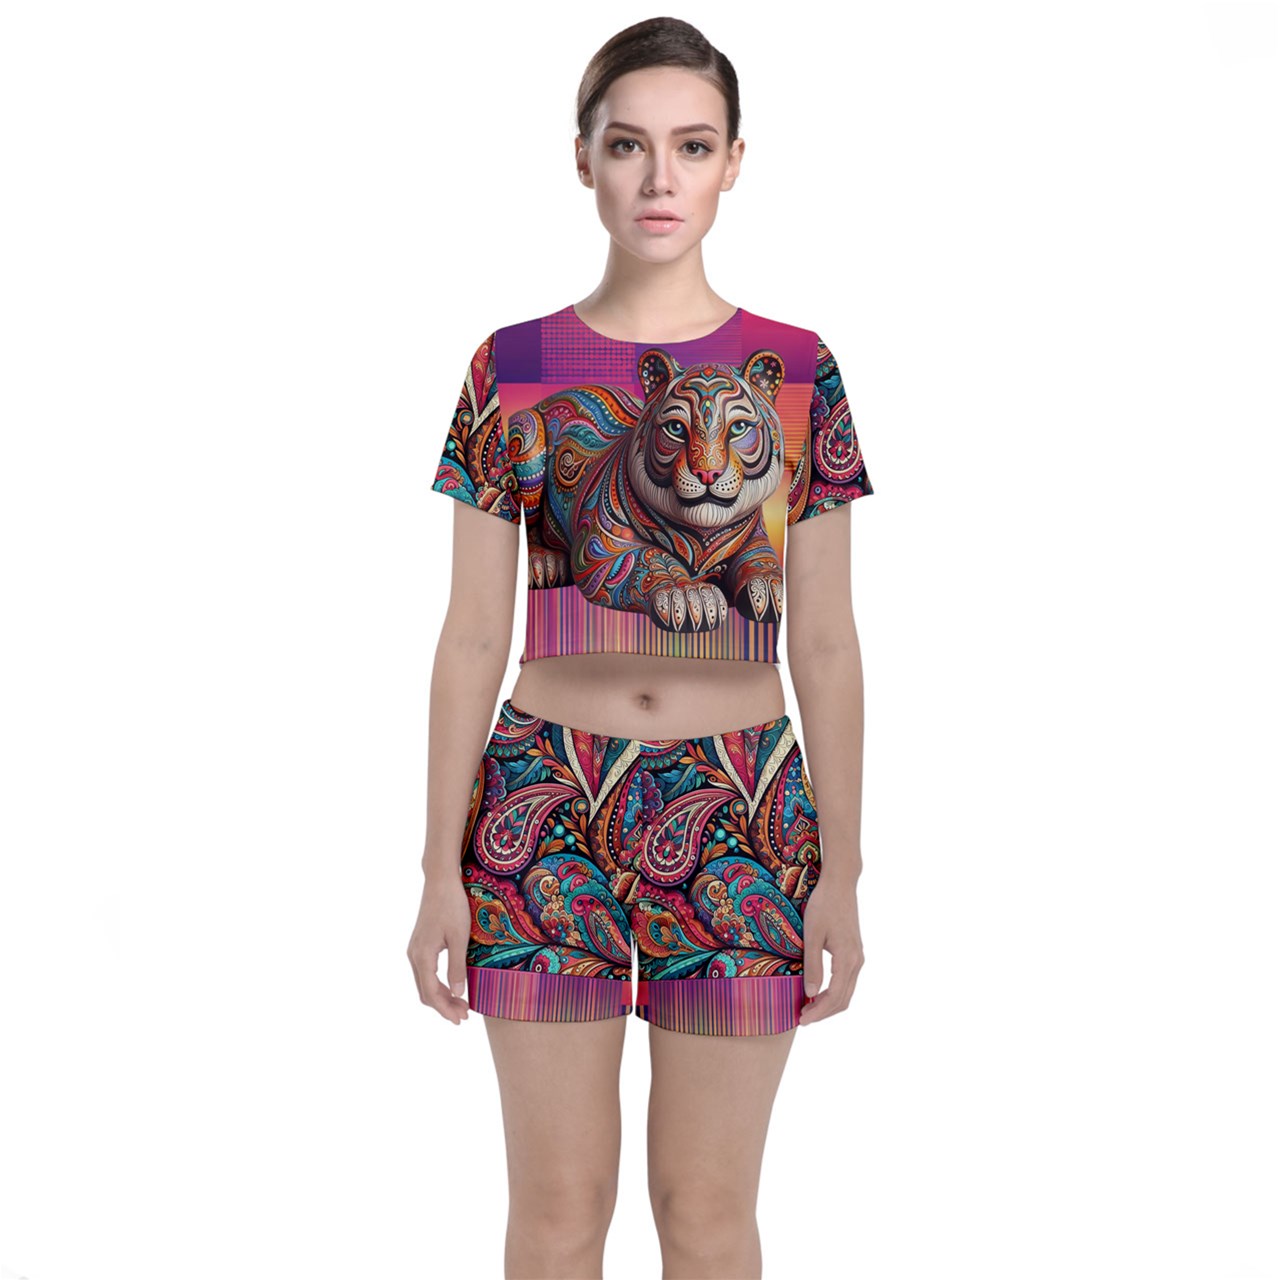 Paisley Tiger Crop Top and Shorts Outfit Set